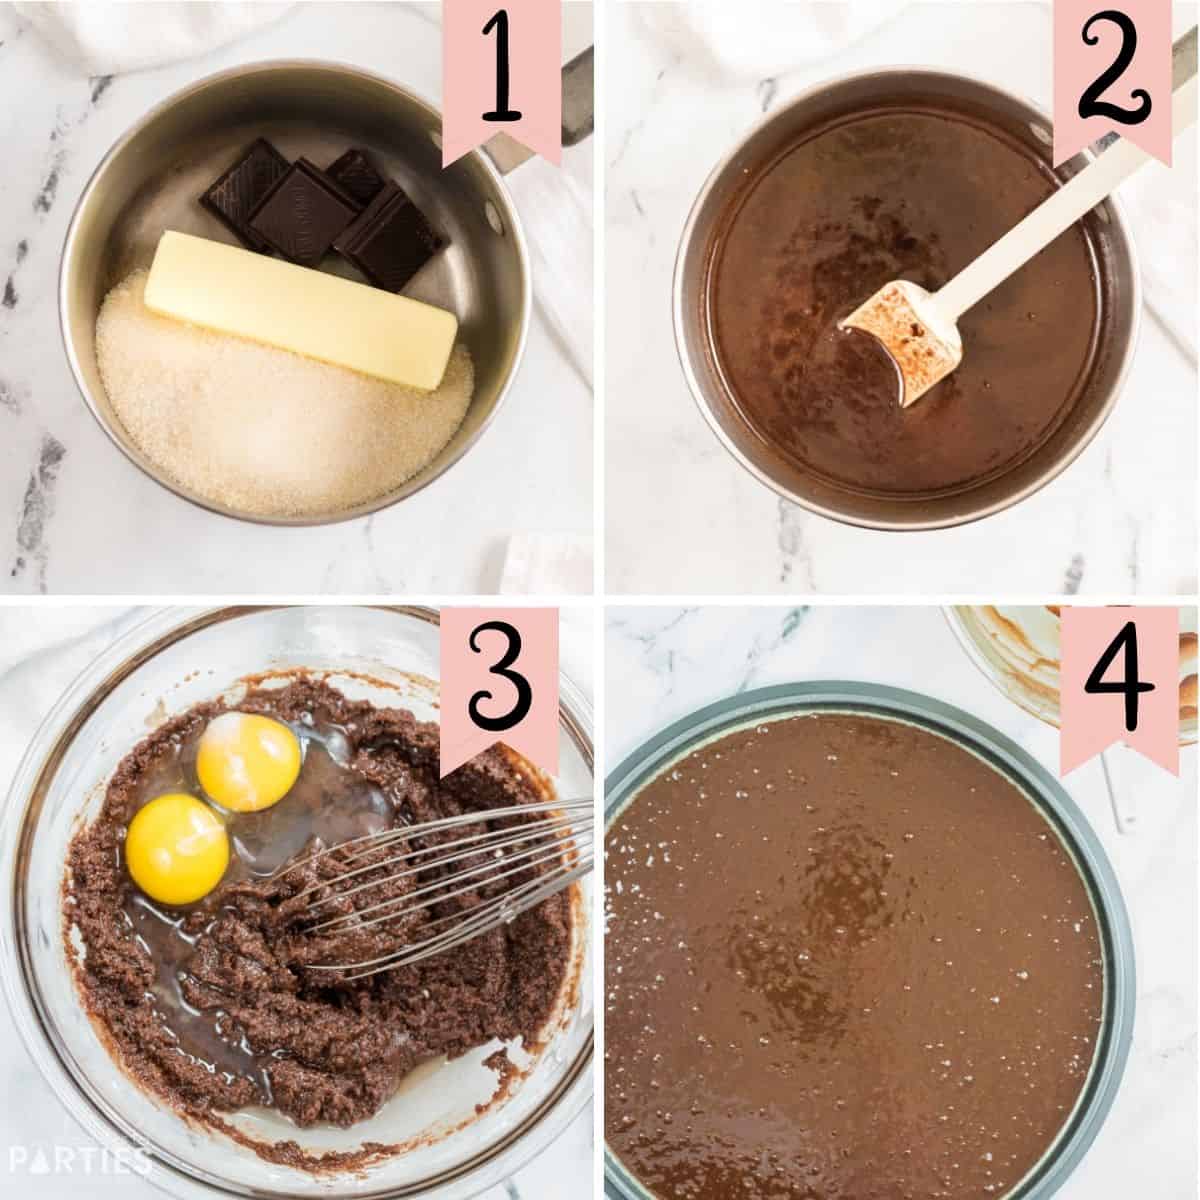 Collage of steps 1 through 4: Making brownie batter from scratch and pouring into the pizza pan